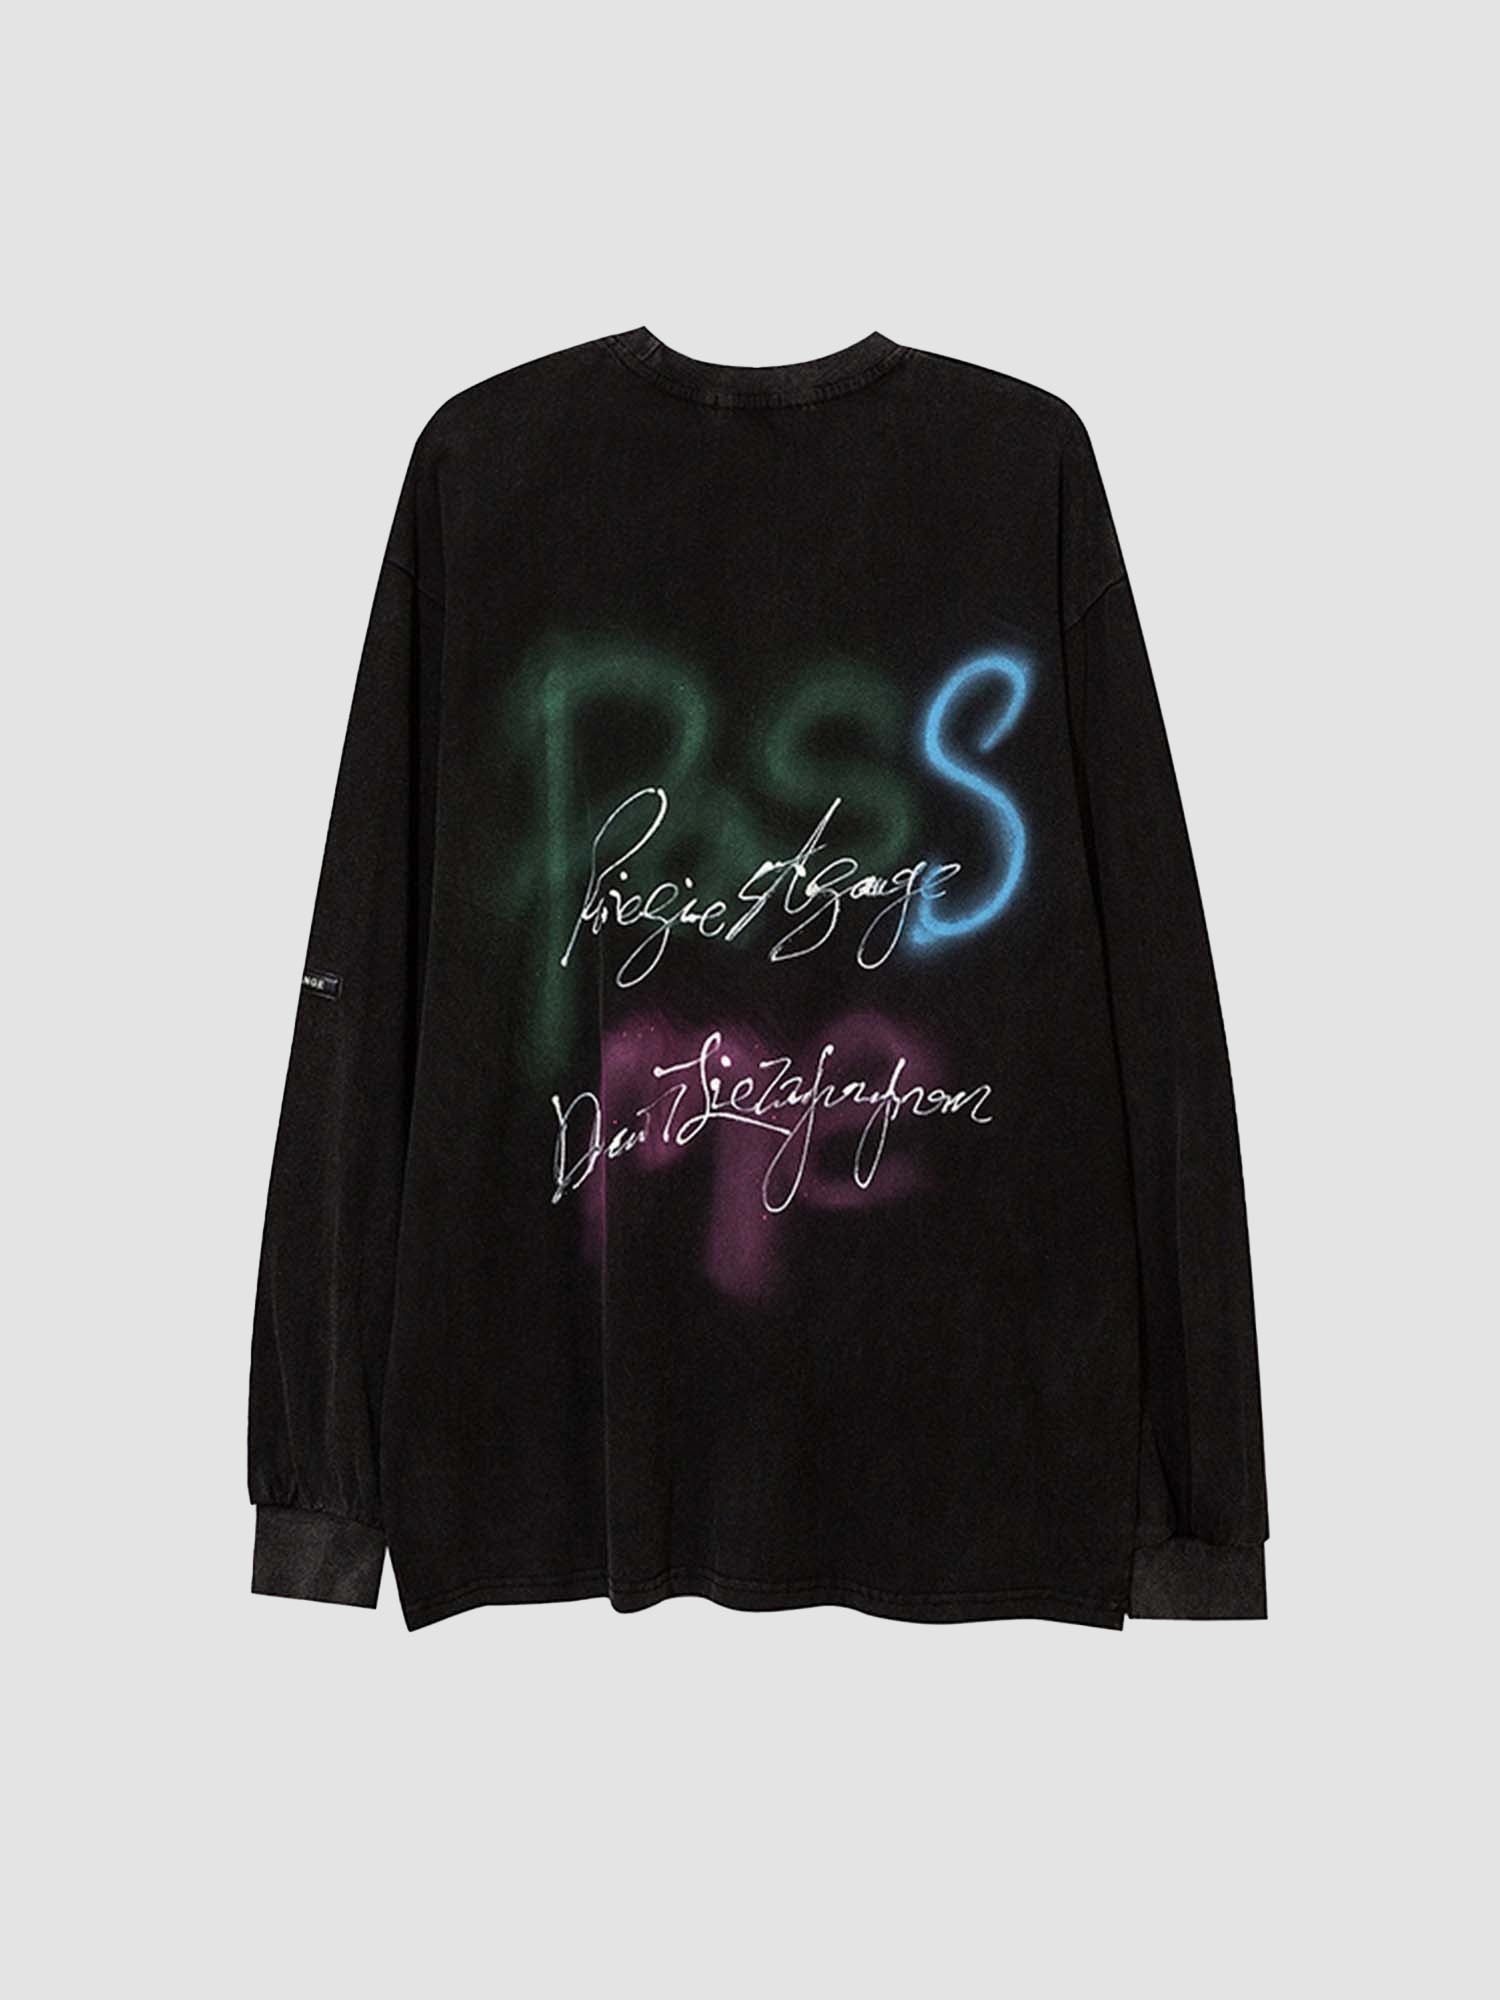 JUSTNOTAG Letter Print Cotton Long Sleeve Tee